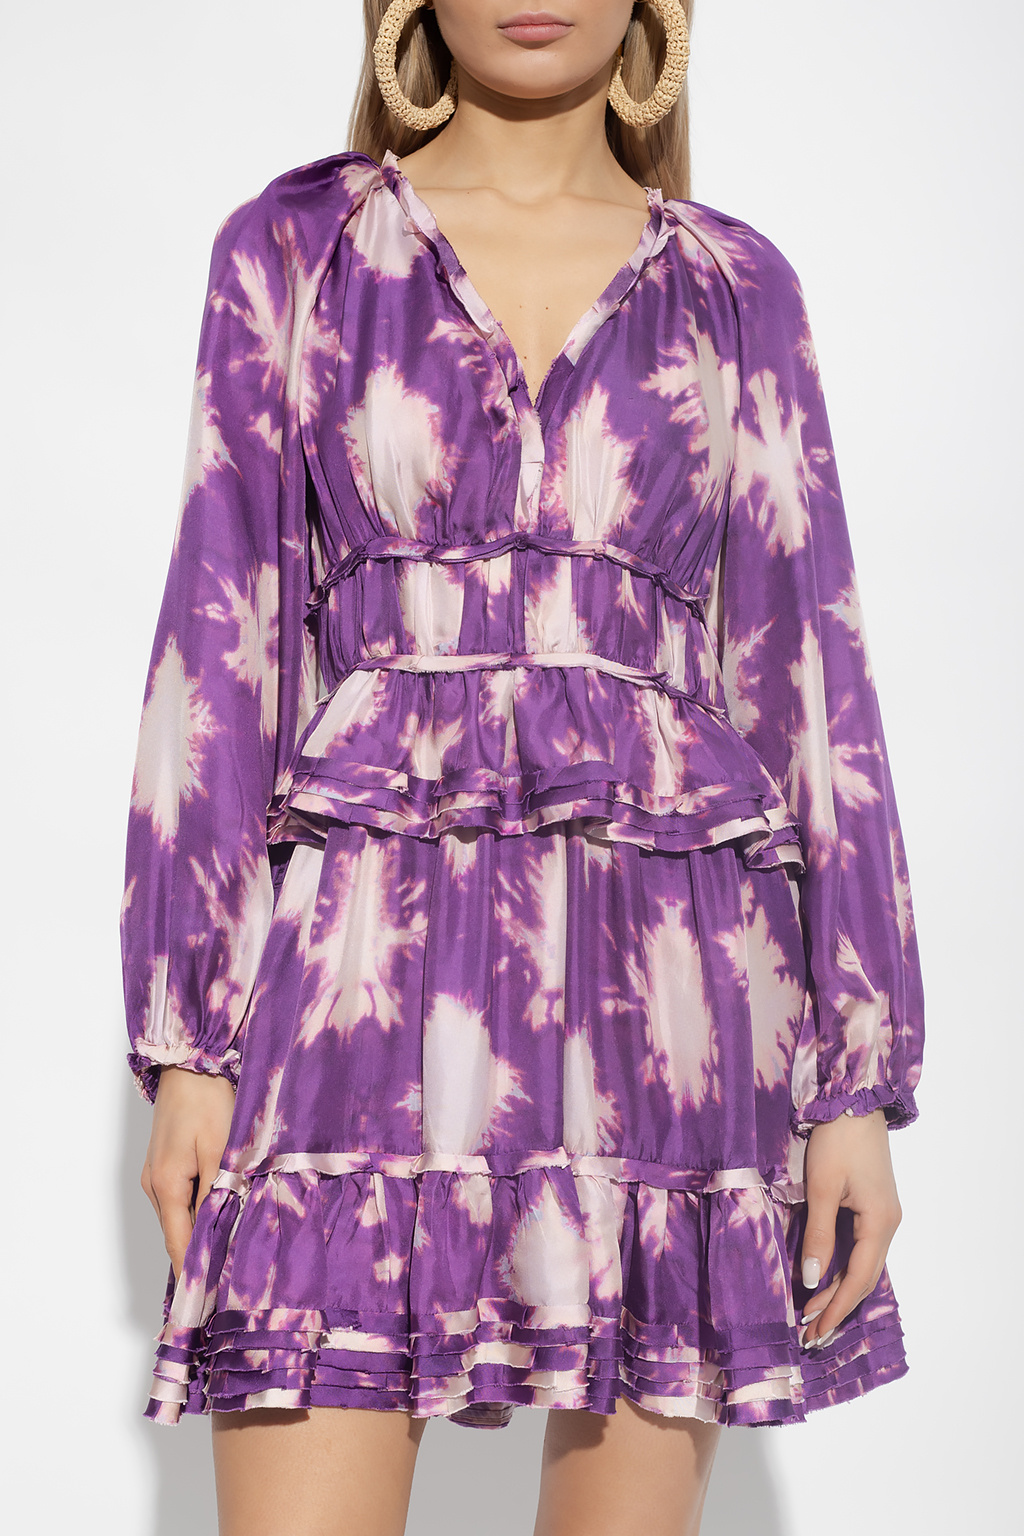 Starlet Satin Robe Gown (XS, S and L ONLY)